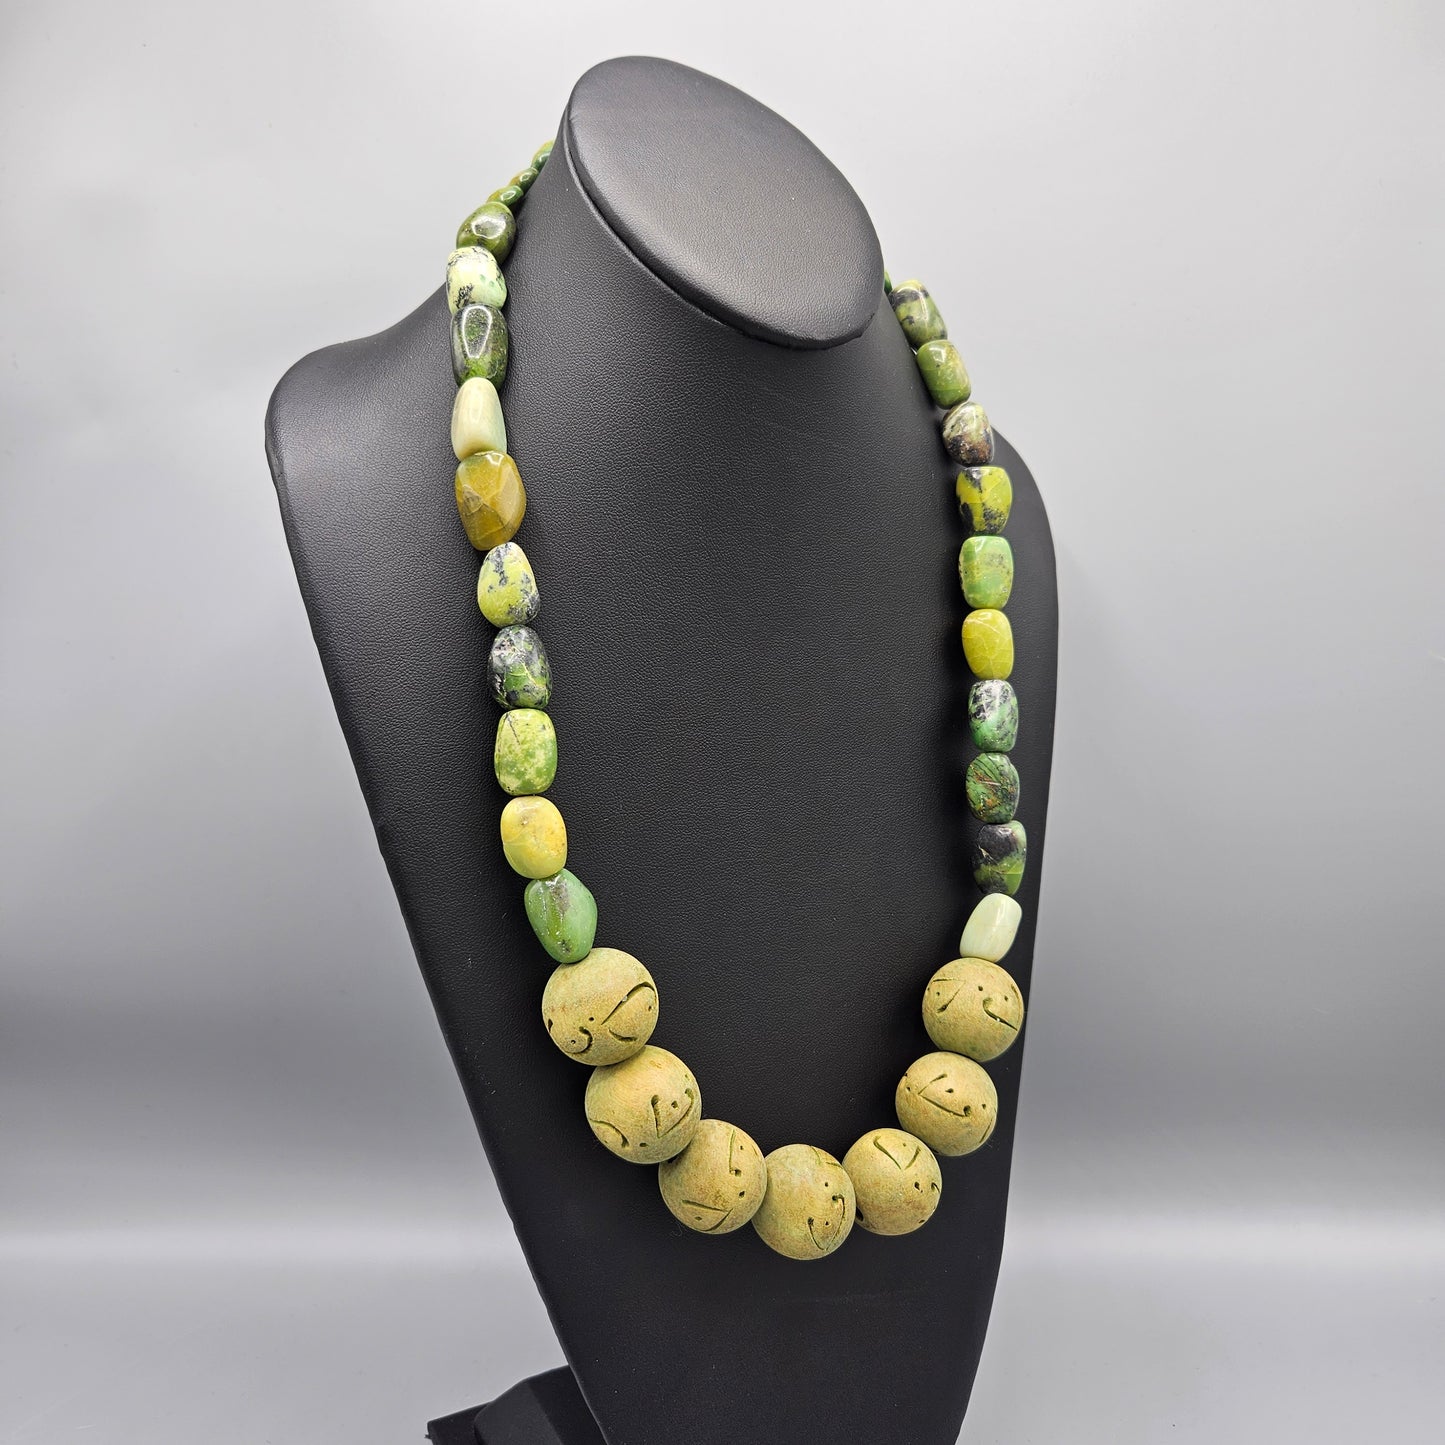 Vintage Green Stone & Wood Beaded Necklace